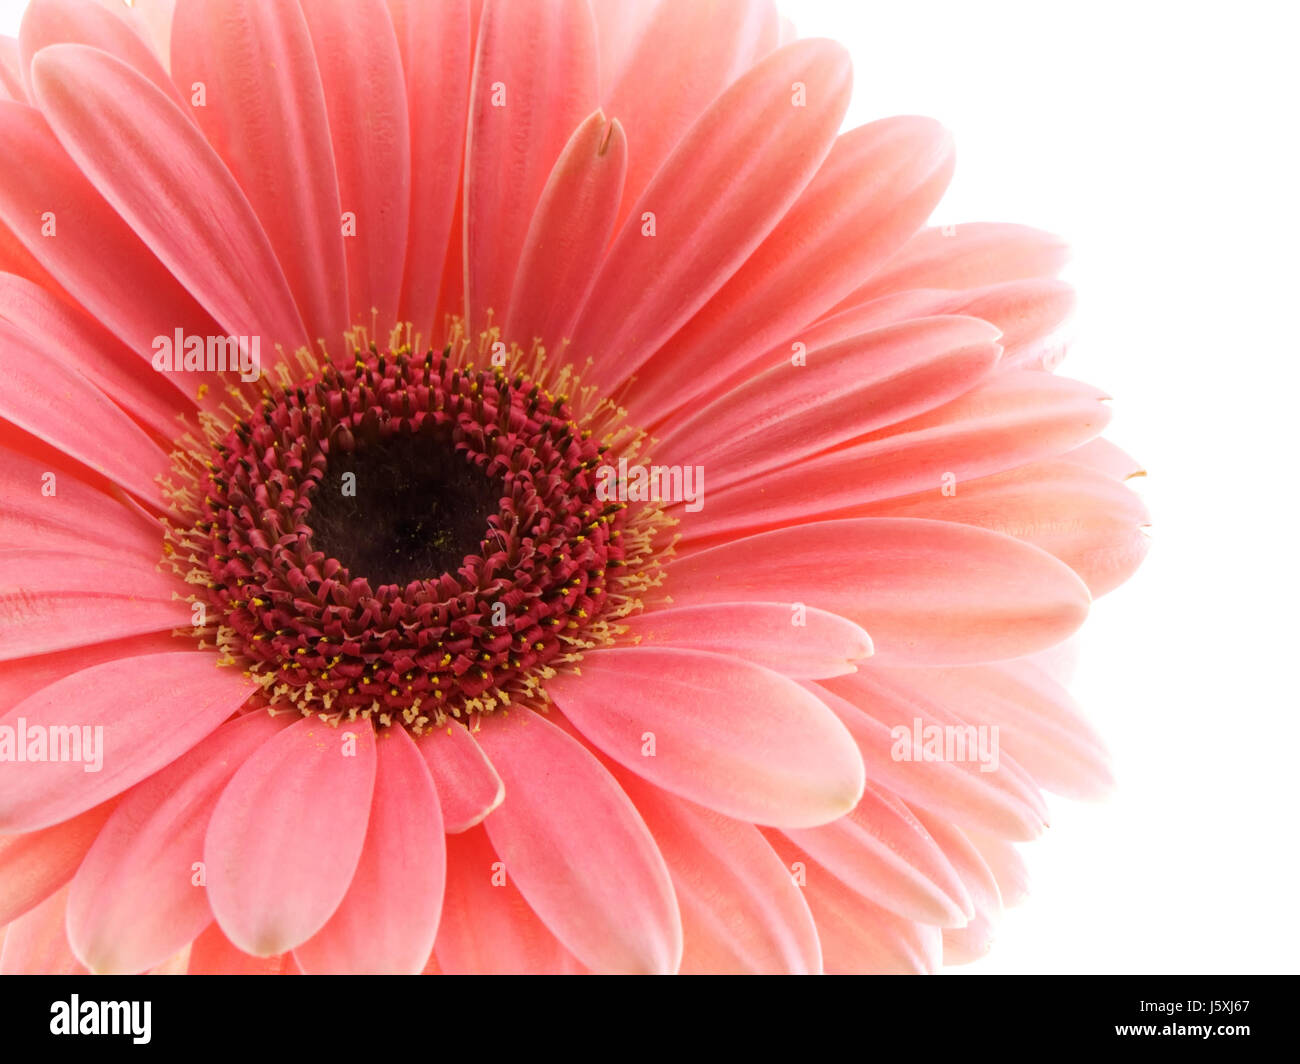 macro close-up macro admission close up view isolated flower plant petals Stock Photo